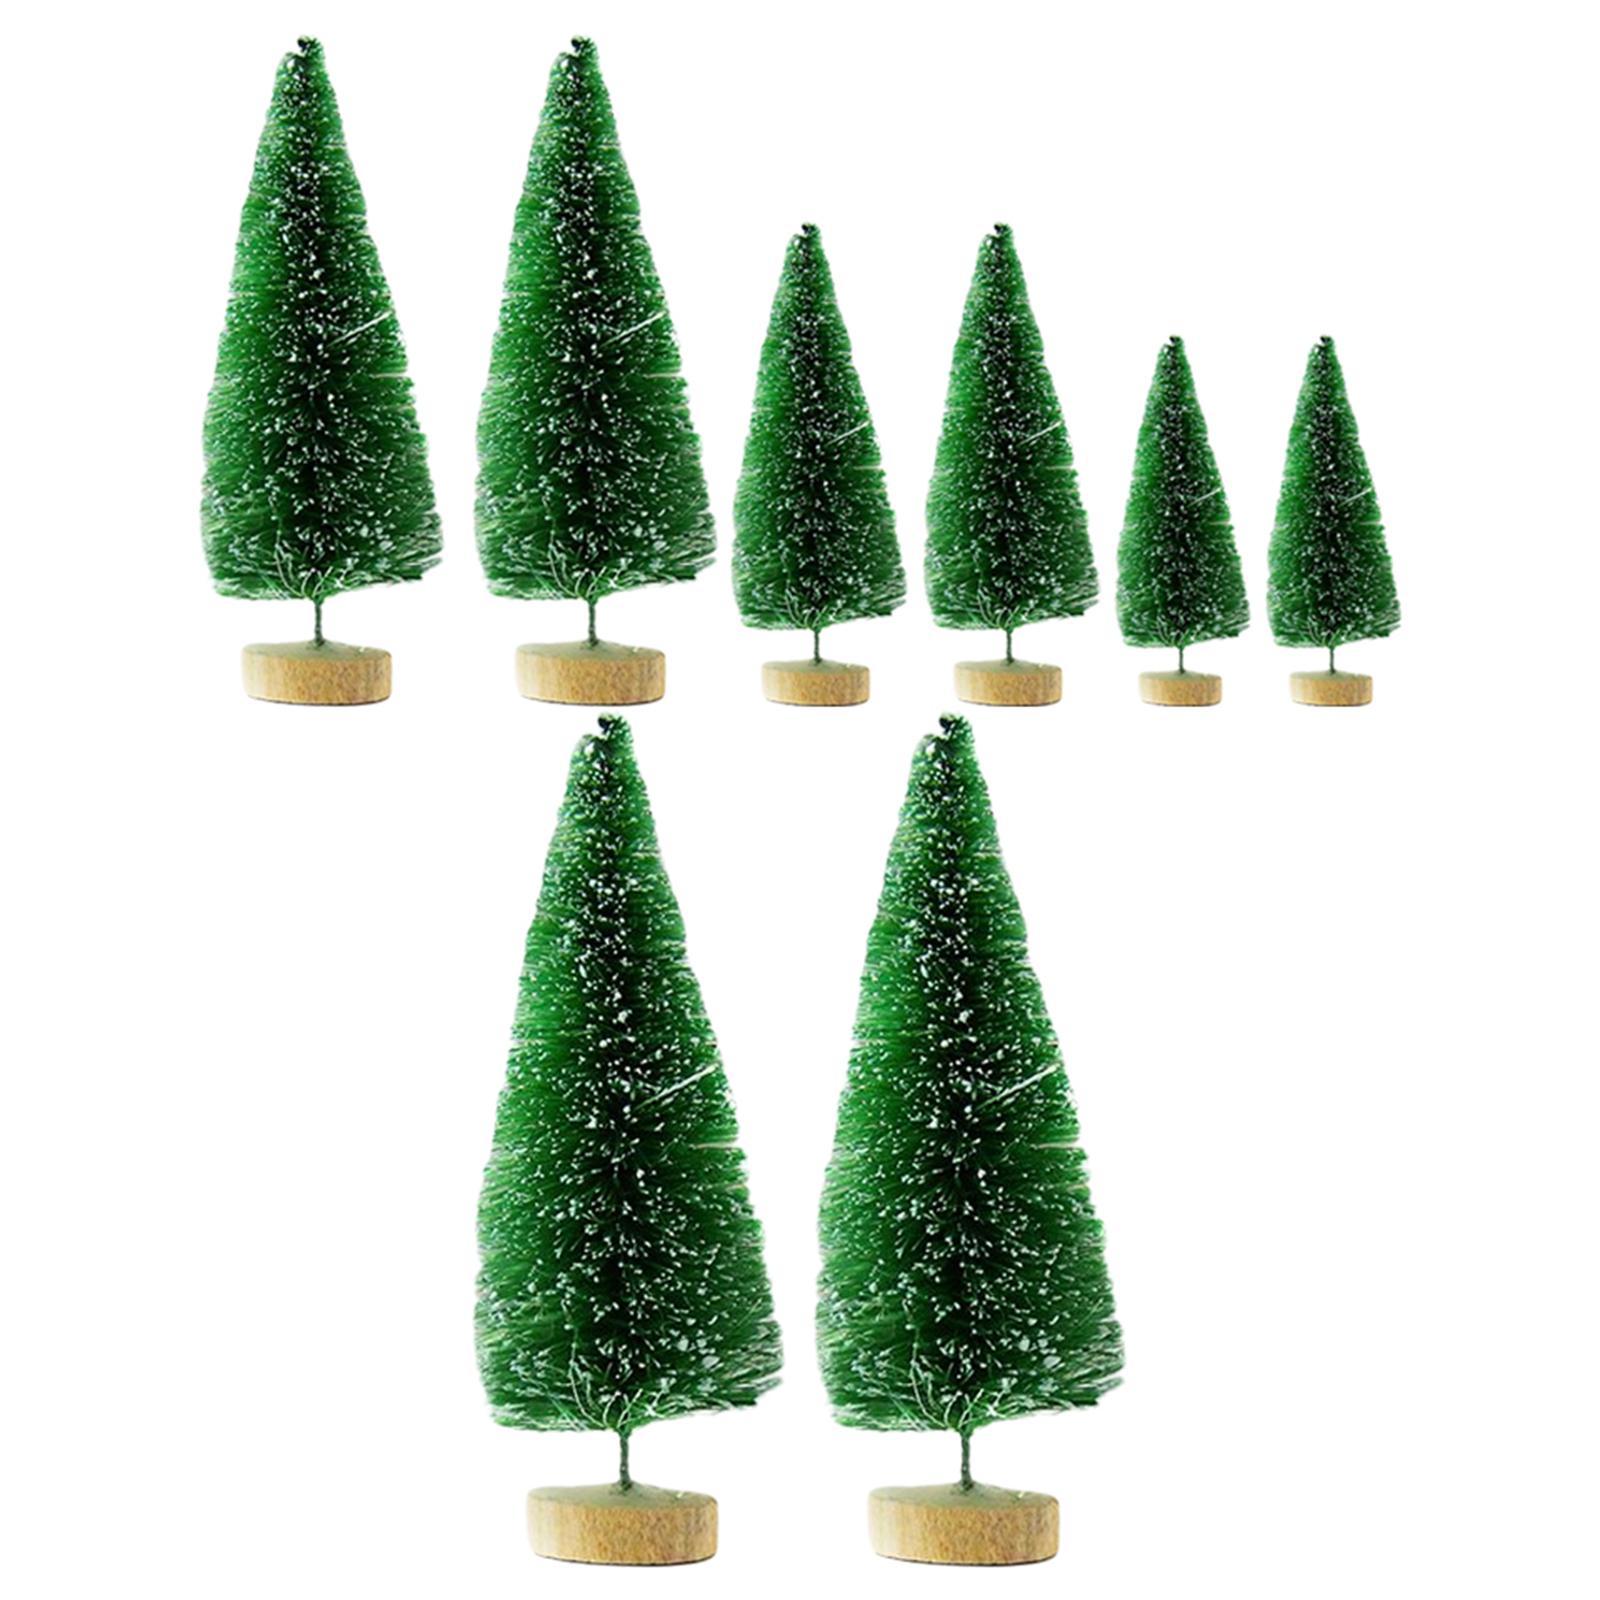 8x Desktop Miniature Pine Tree Ornaments for Desk Christmas Party Holiday Light Green